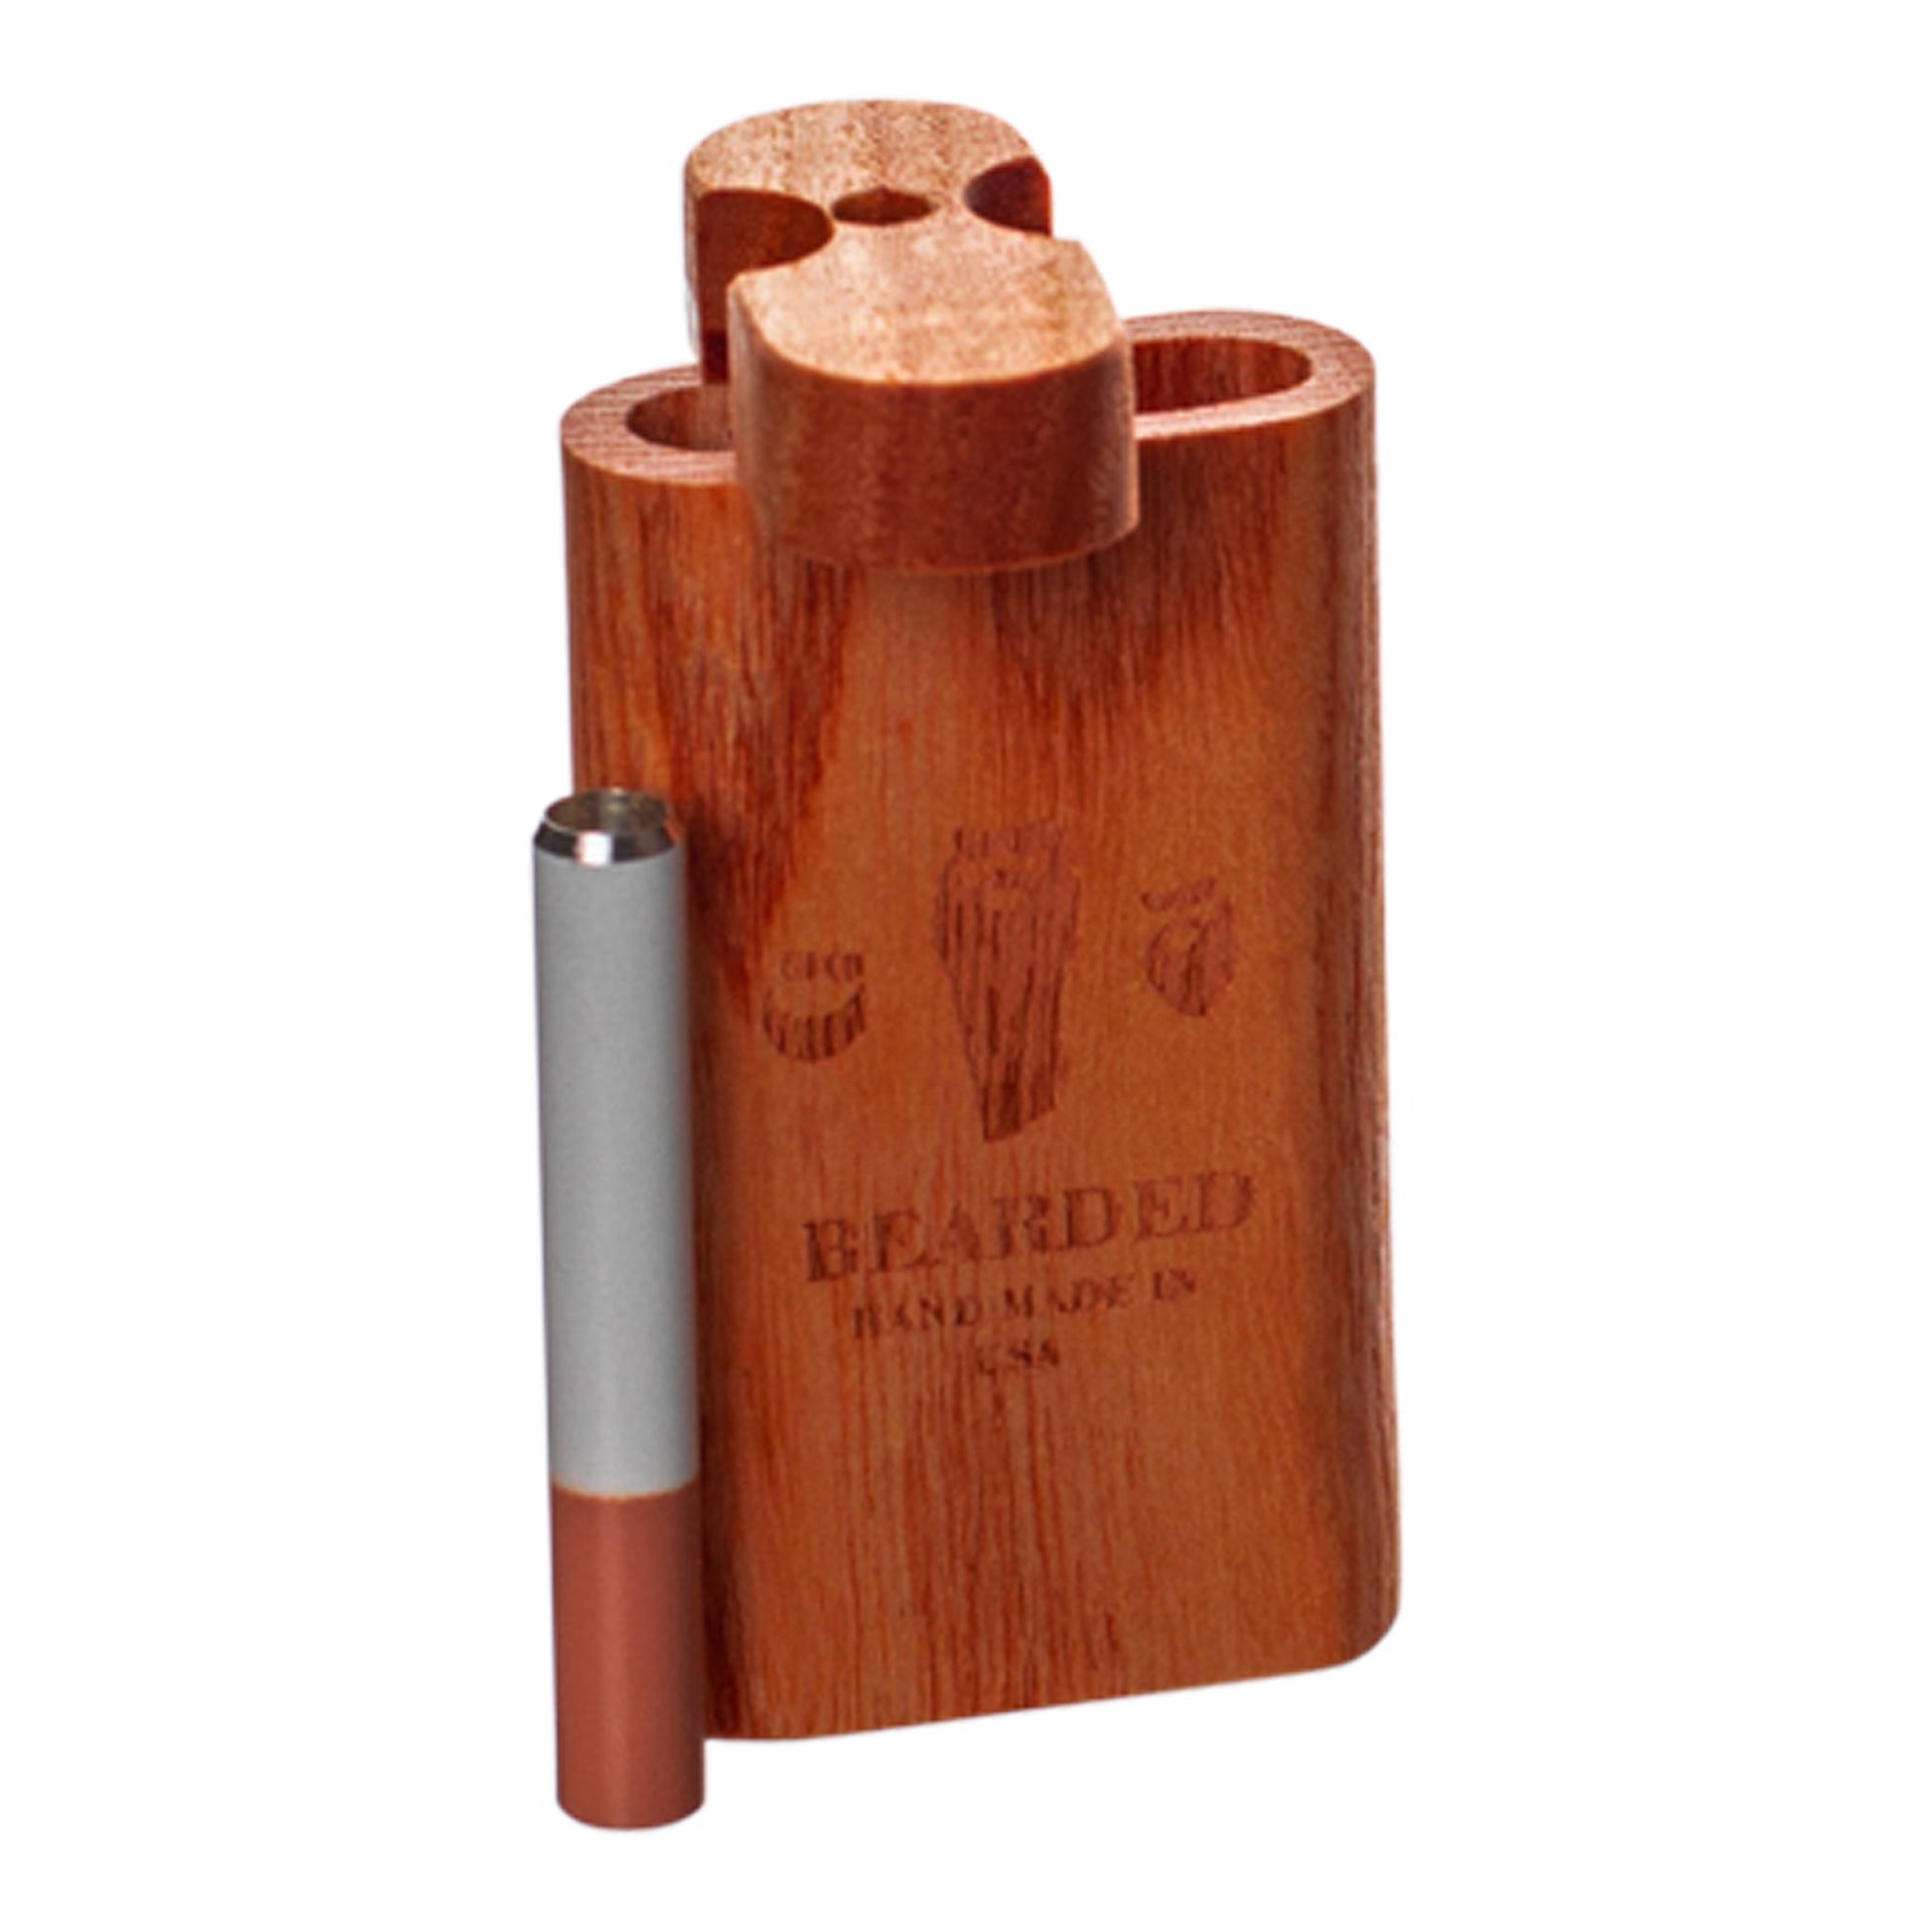 Bearded Wood Dugout - 3in